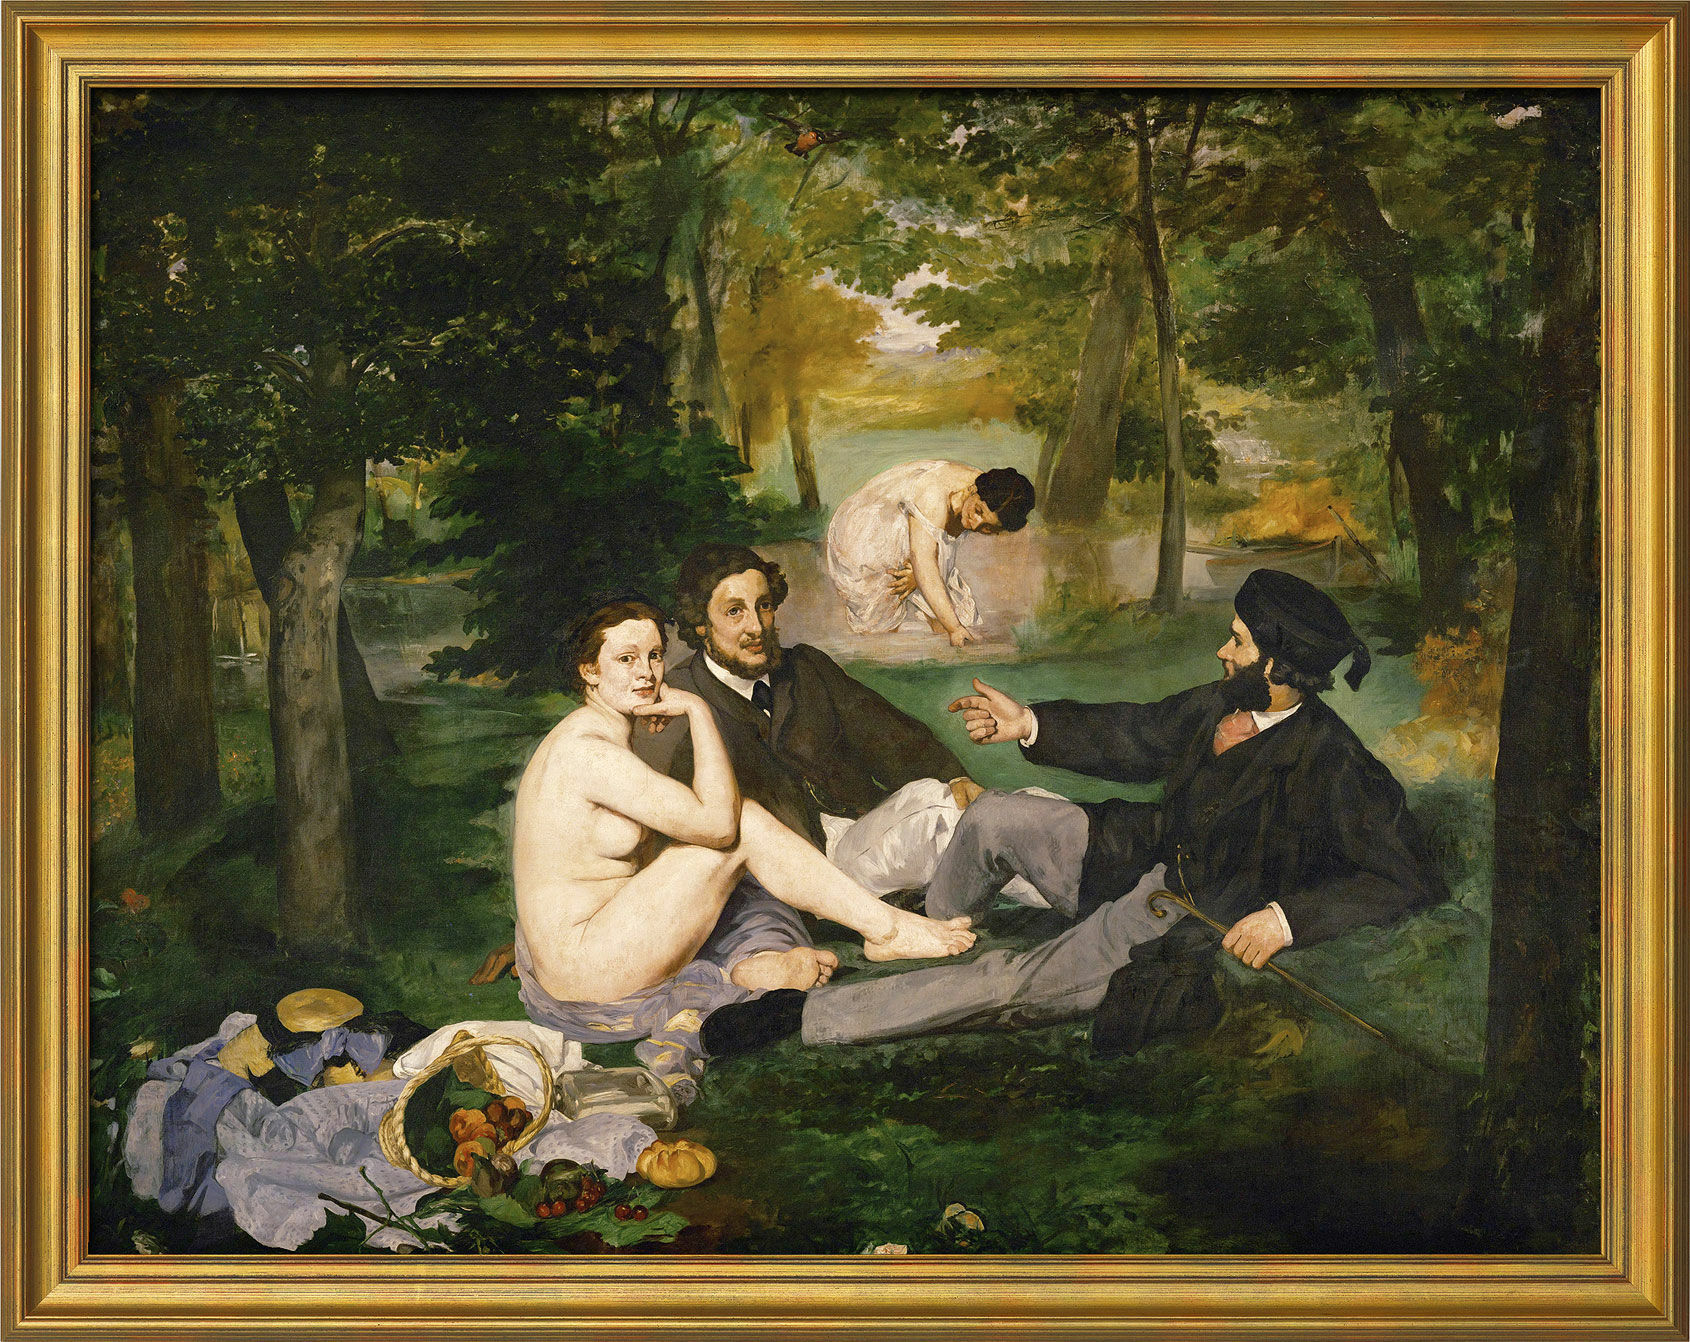 Picture "Le Déjeuner sur l'herbe (The Luncheon on the Grass)" (1863), framed by Edouard Manet